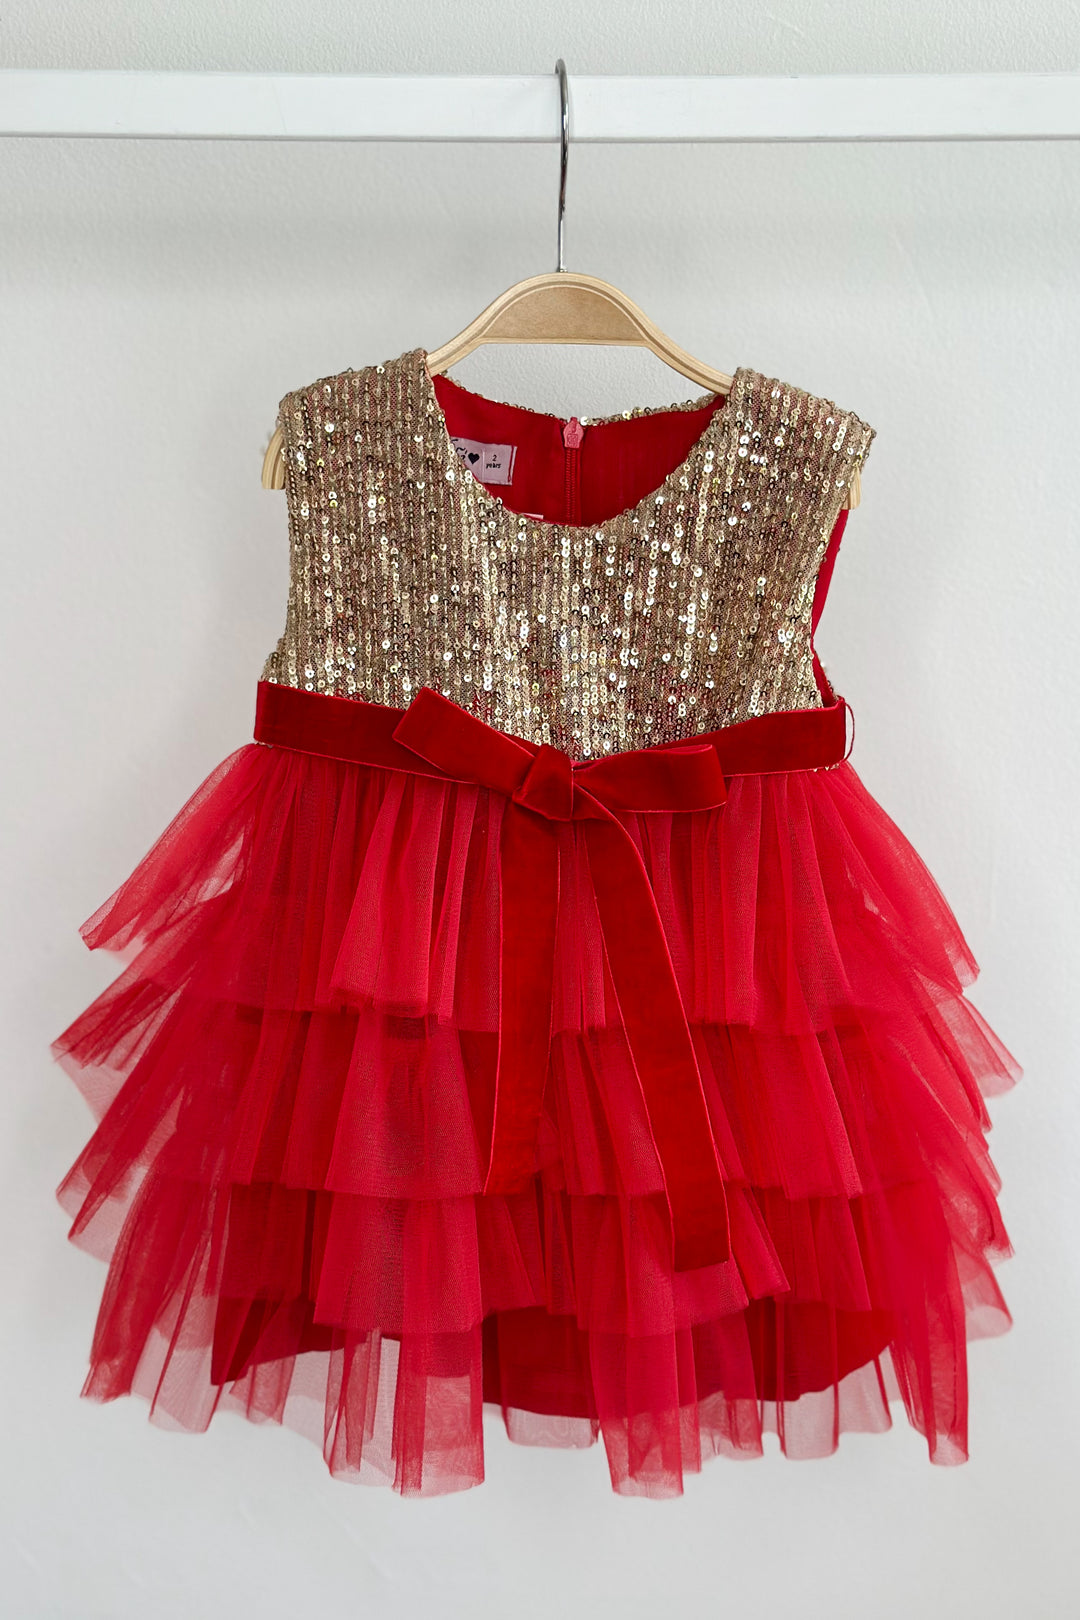 Phi "Eve" Gold Sequin Red Tulle Dress | Millie and John